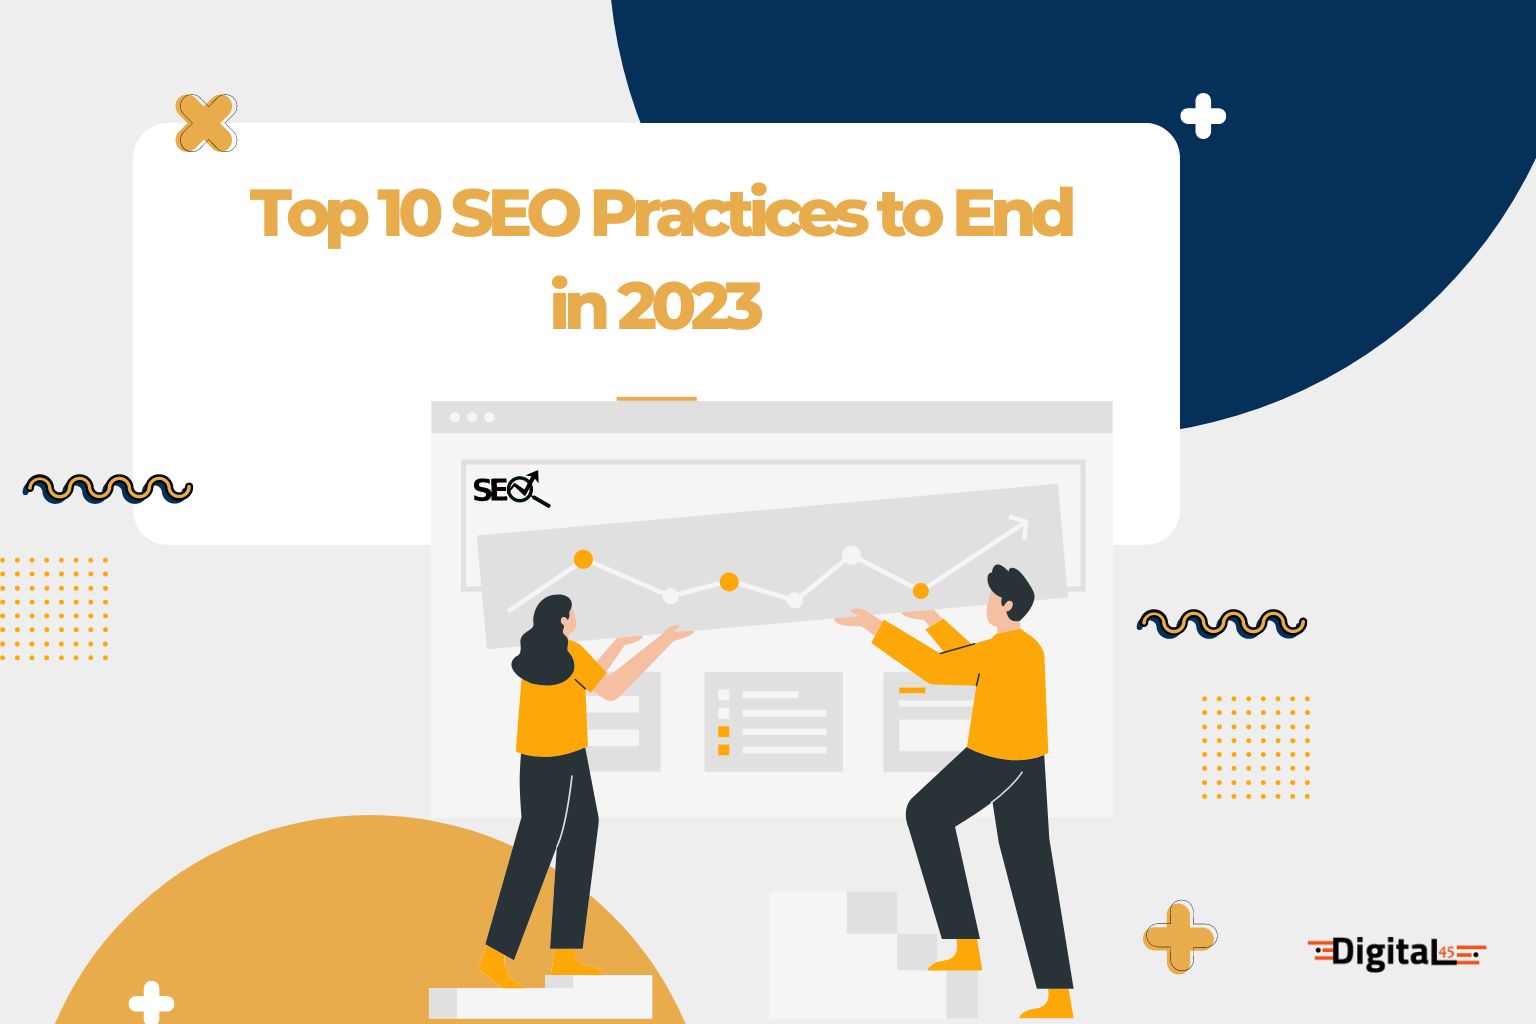 Top 10 SEO Practices to End in 2023